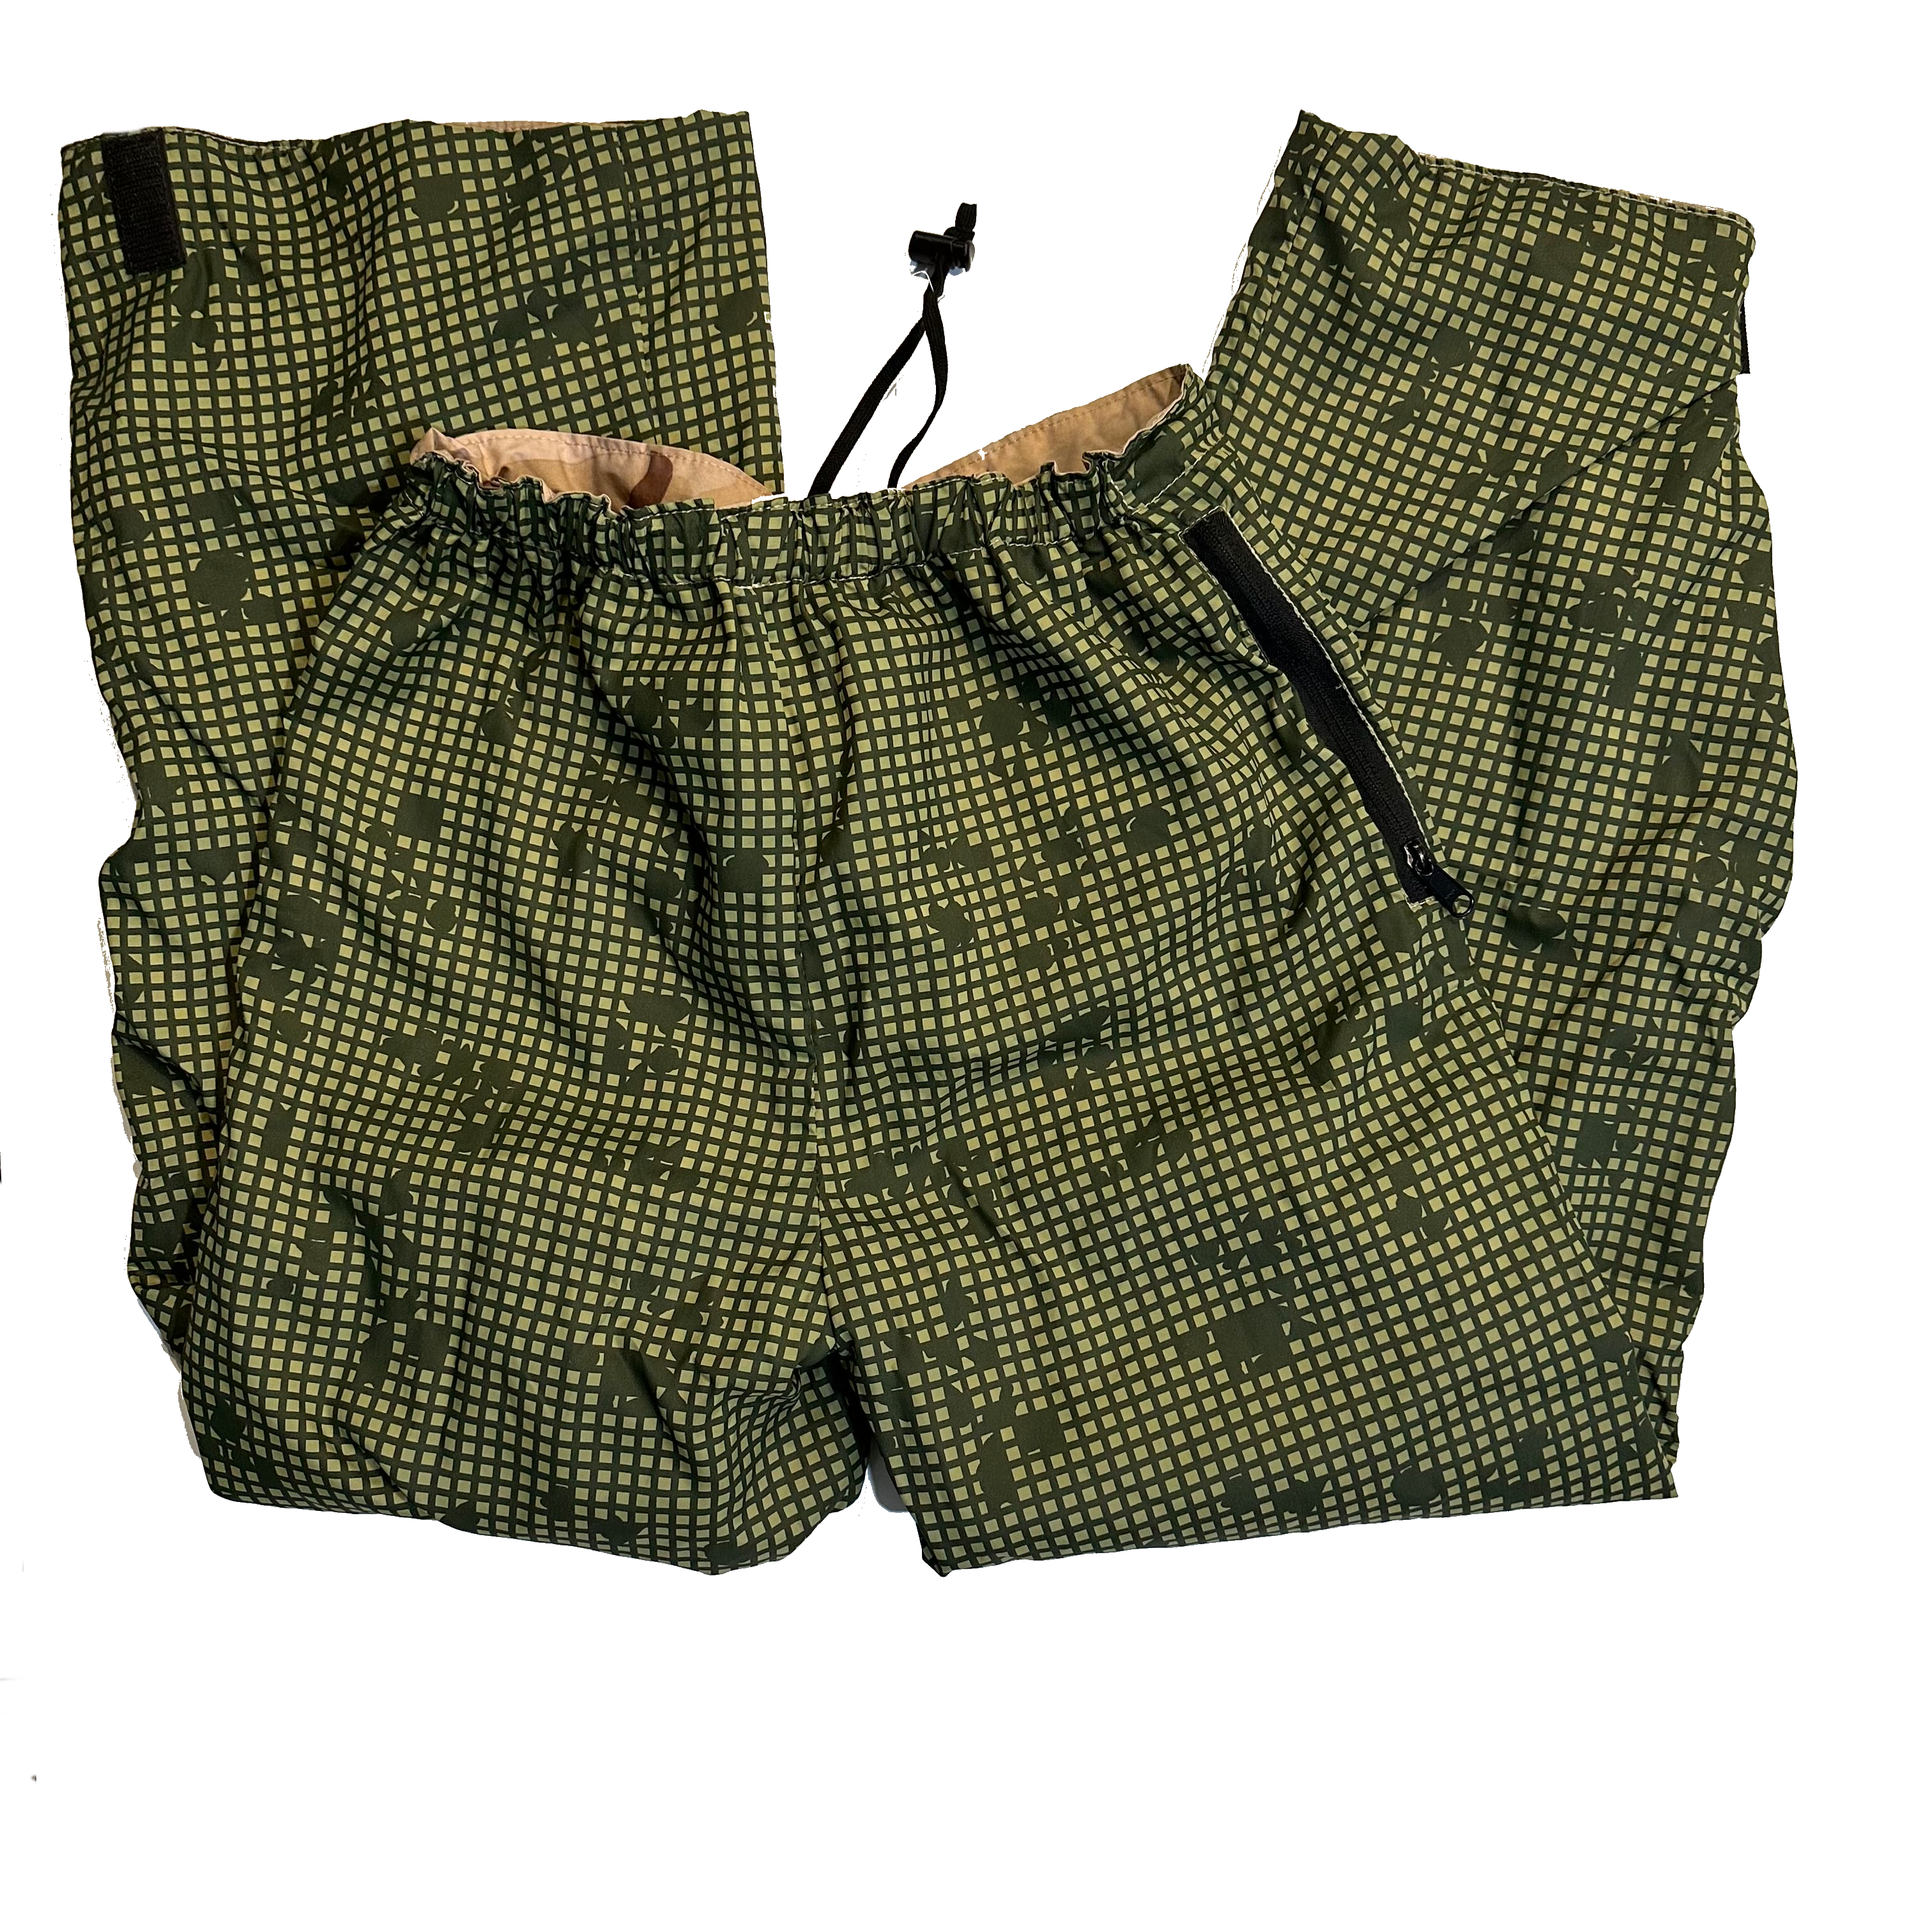 Desert Night camo pants acquired and they just barely fit me   rtacticalgear